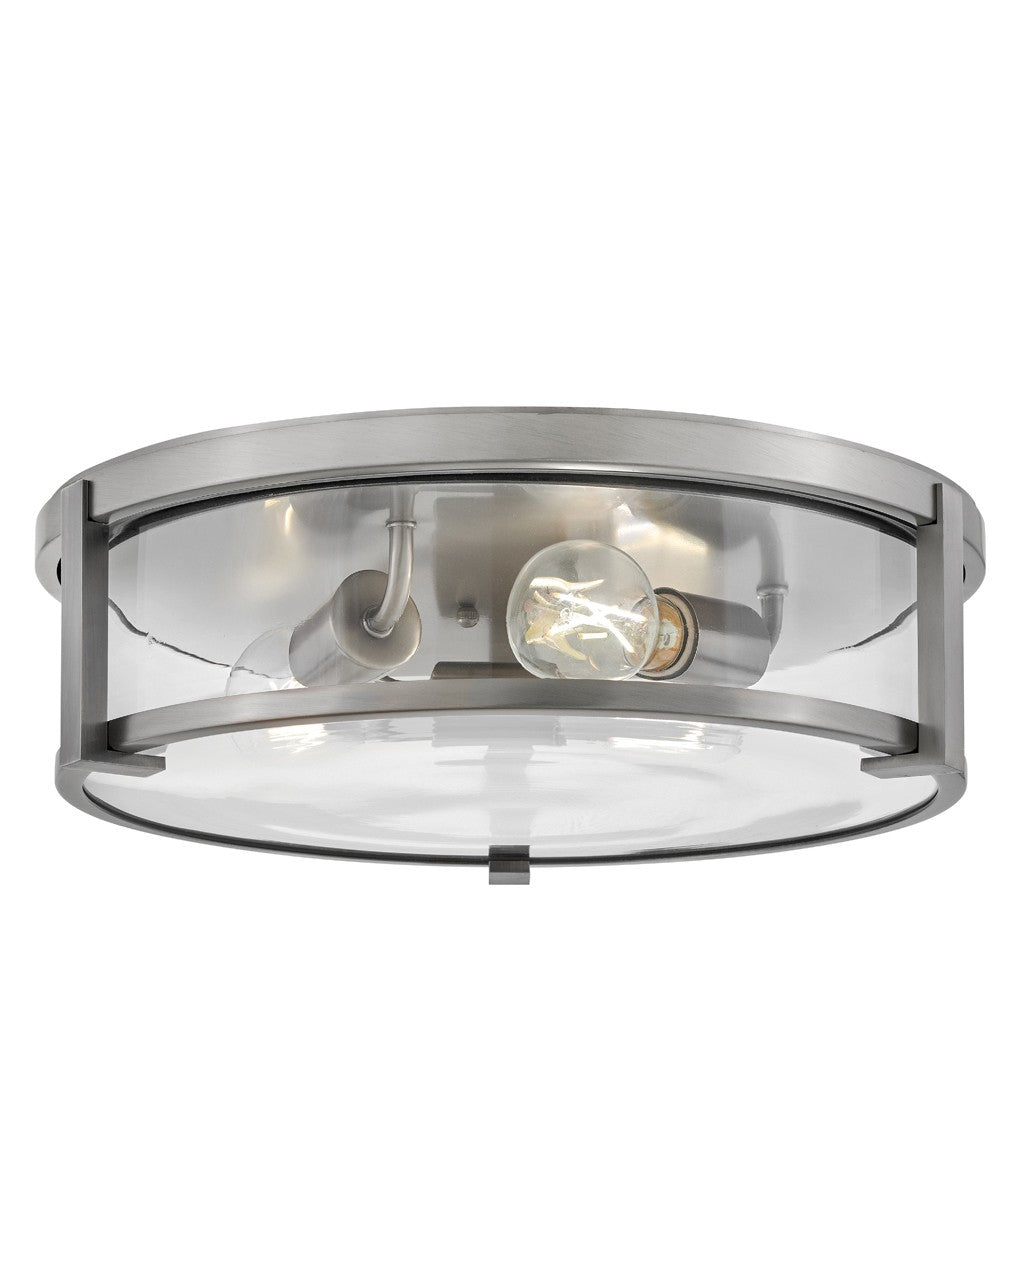 Hinkley - 3243AN-CL - LED Flush Mount - Lowell - Antique Nickel